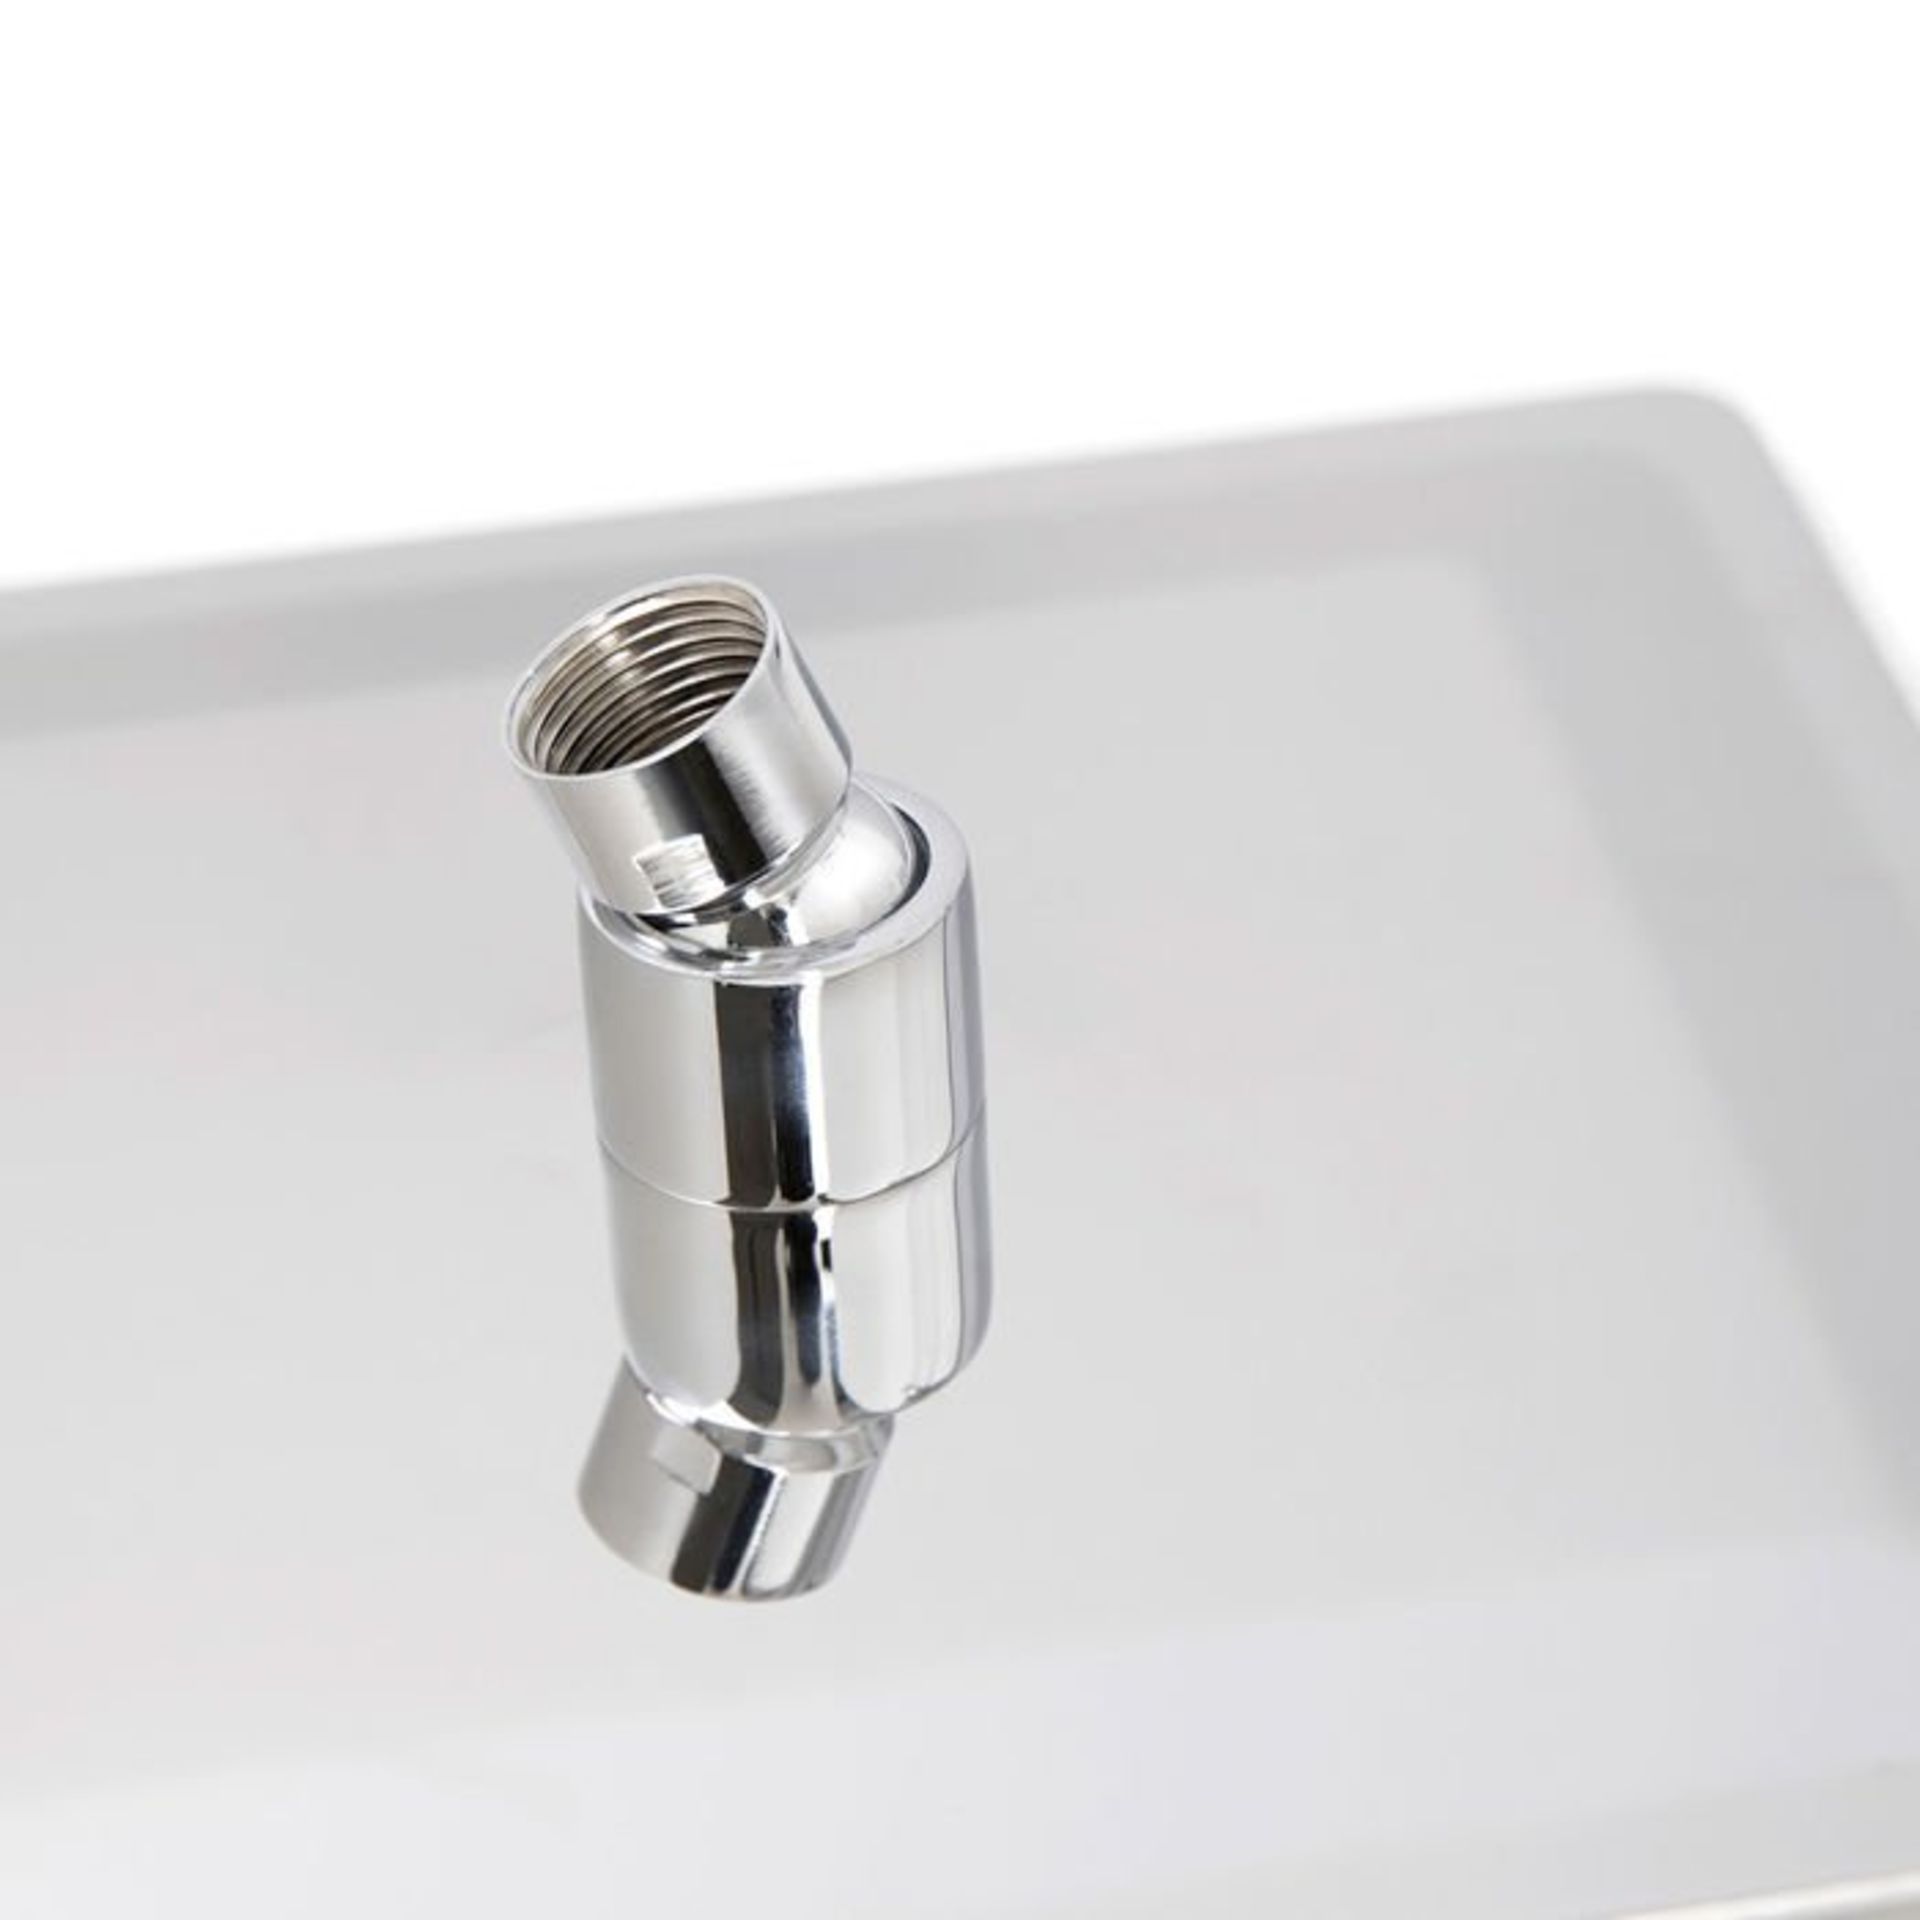 (H37) Square Concealed Thermostatic Mixer Shower Kit & Medium Head. Family friendly detachable - Image 6 of 6